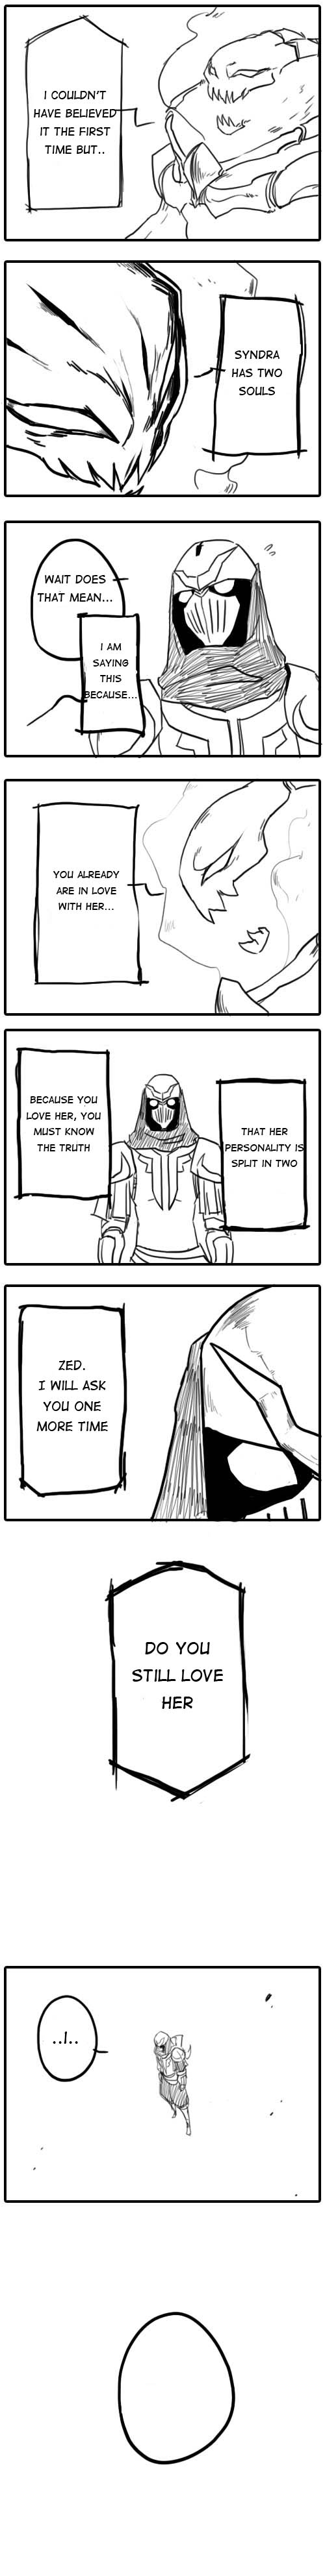 League of Legends Syndra & Zed's Everyday Life (Doujinshi) Vol. 1 Ch. 5